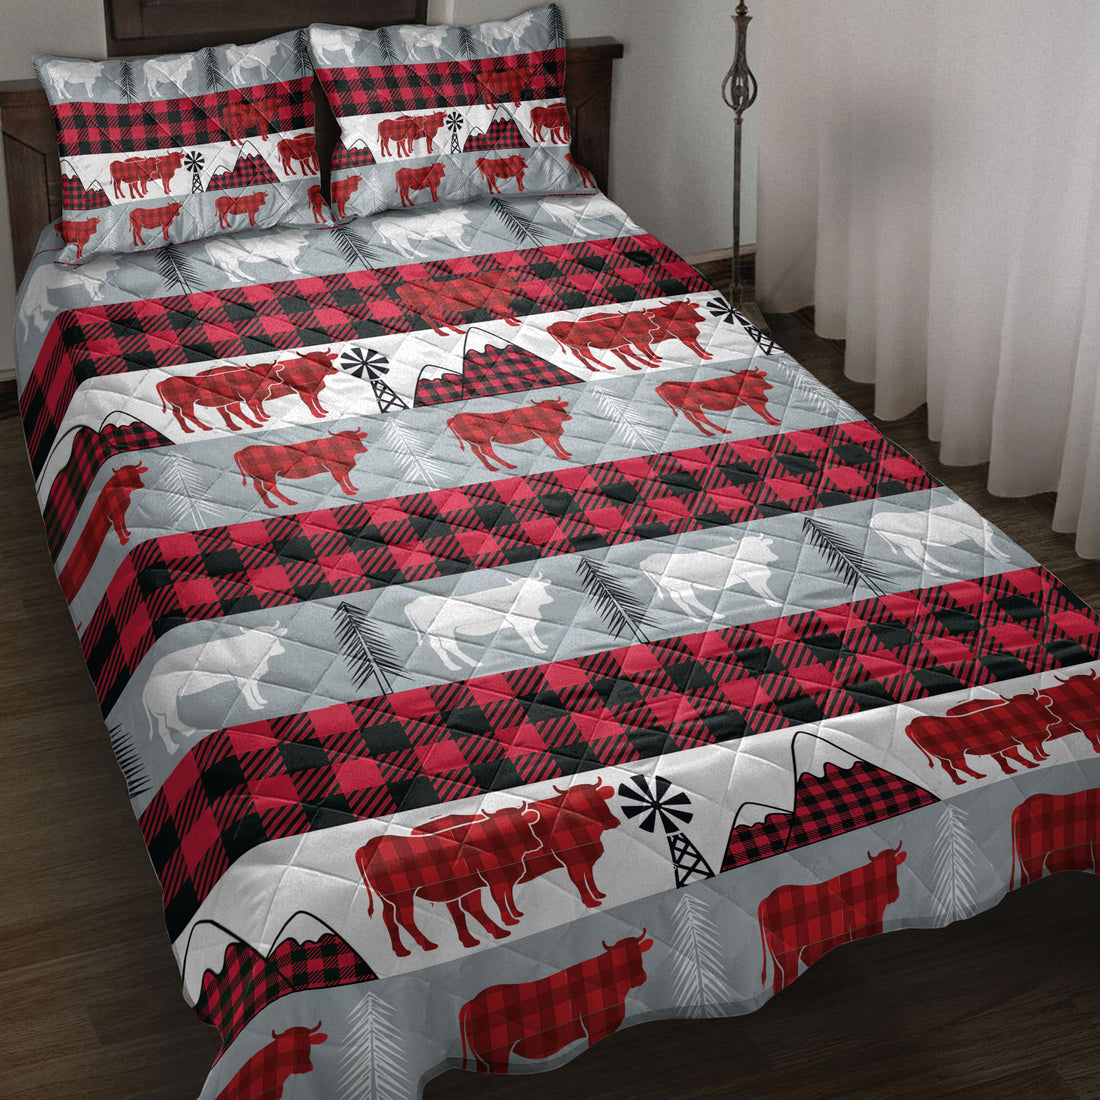 Ohaprints-Quilt-Bed-Set-Pillowcase-Christmas-Cow-Red-Buffalo-Plaid-Winter-Holiday-Unique-Gifts-Blanket-Bedspread-Bedding-4091-Throw (55'' x 60'')